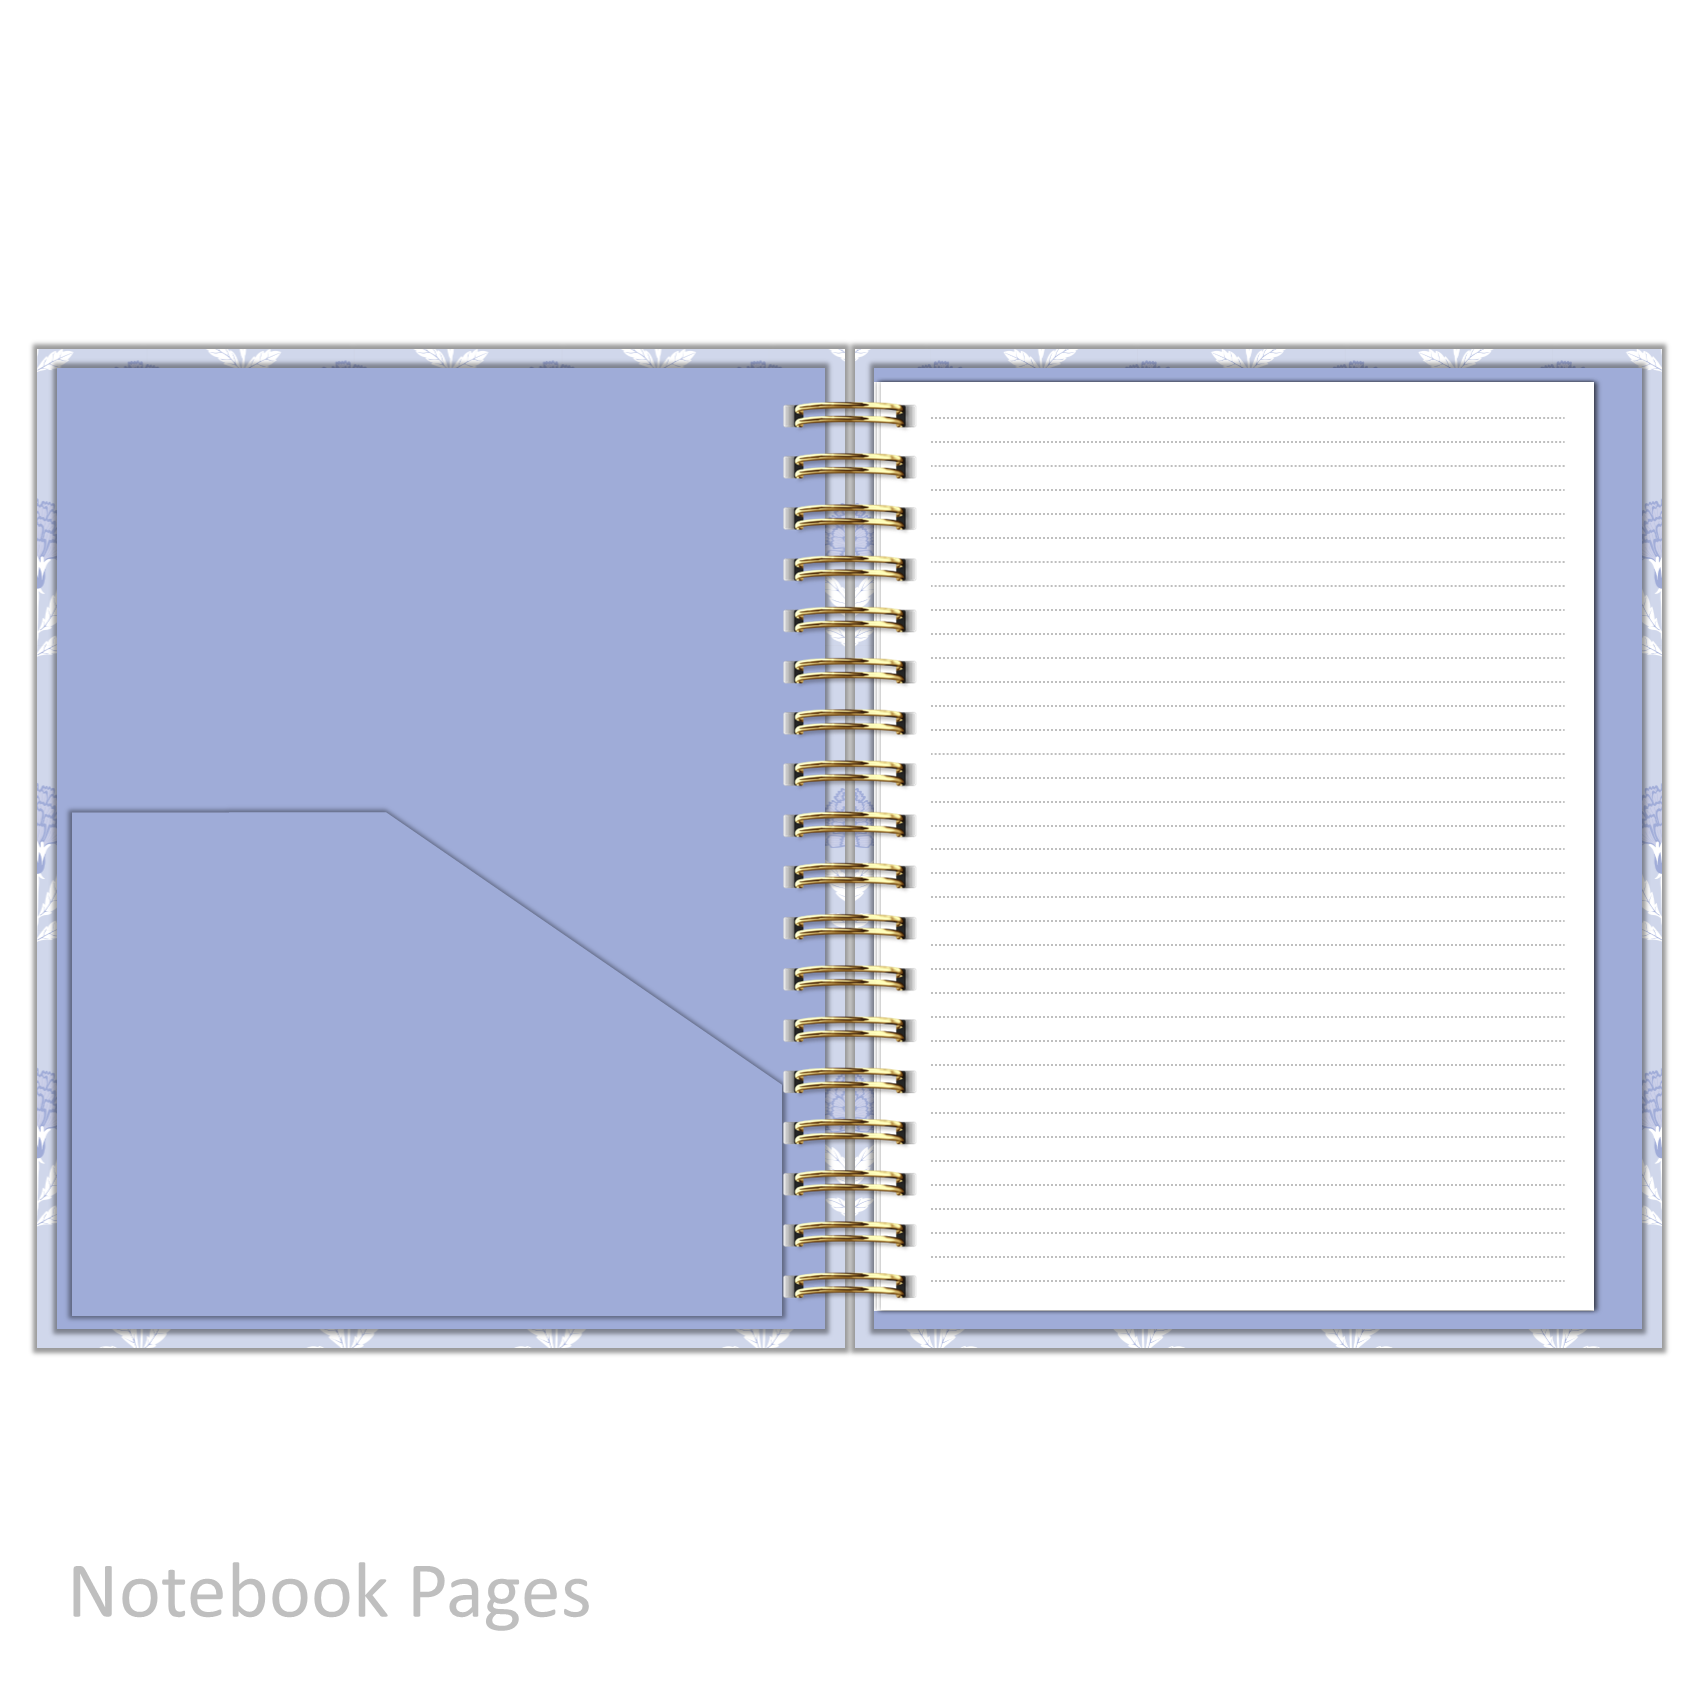 Notebook - "Classic Size" Well with Your Soul